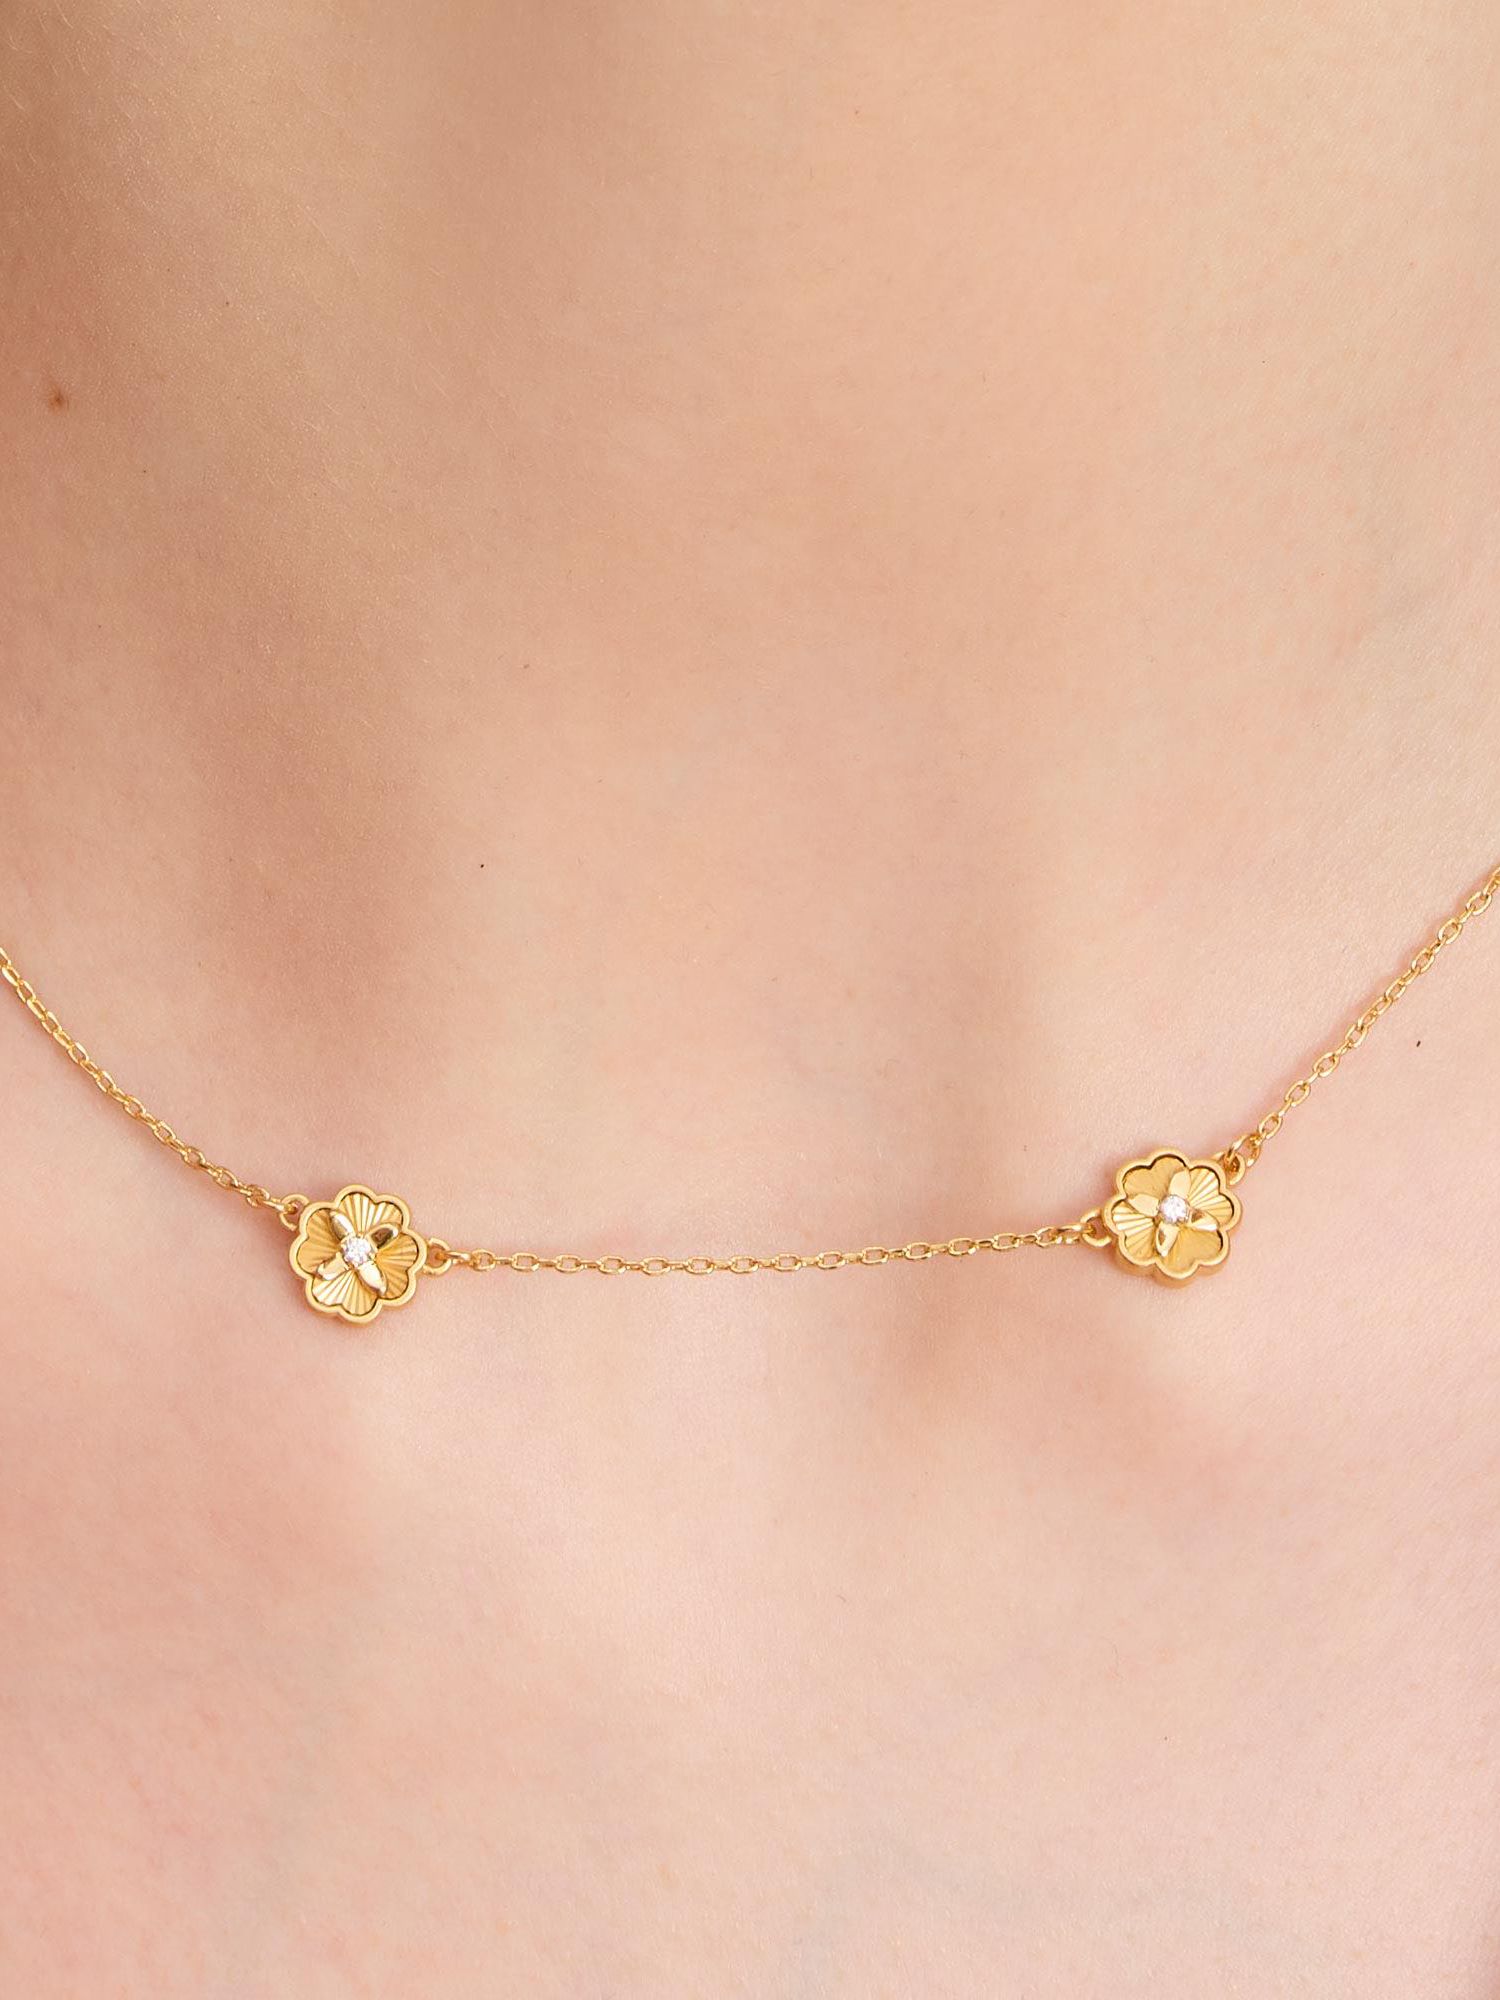 Buy kate spade new york Bloom Charm Necklace, Gold Online at johnlewis.com